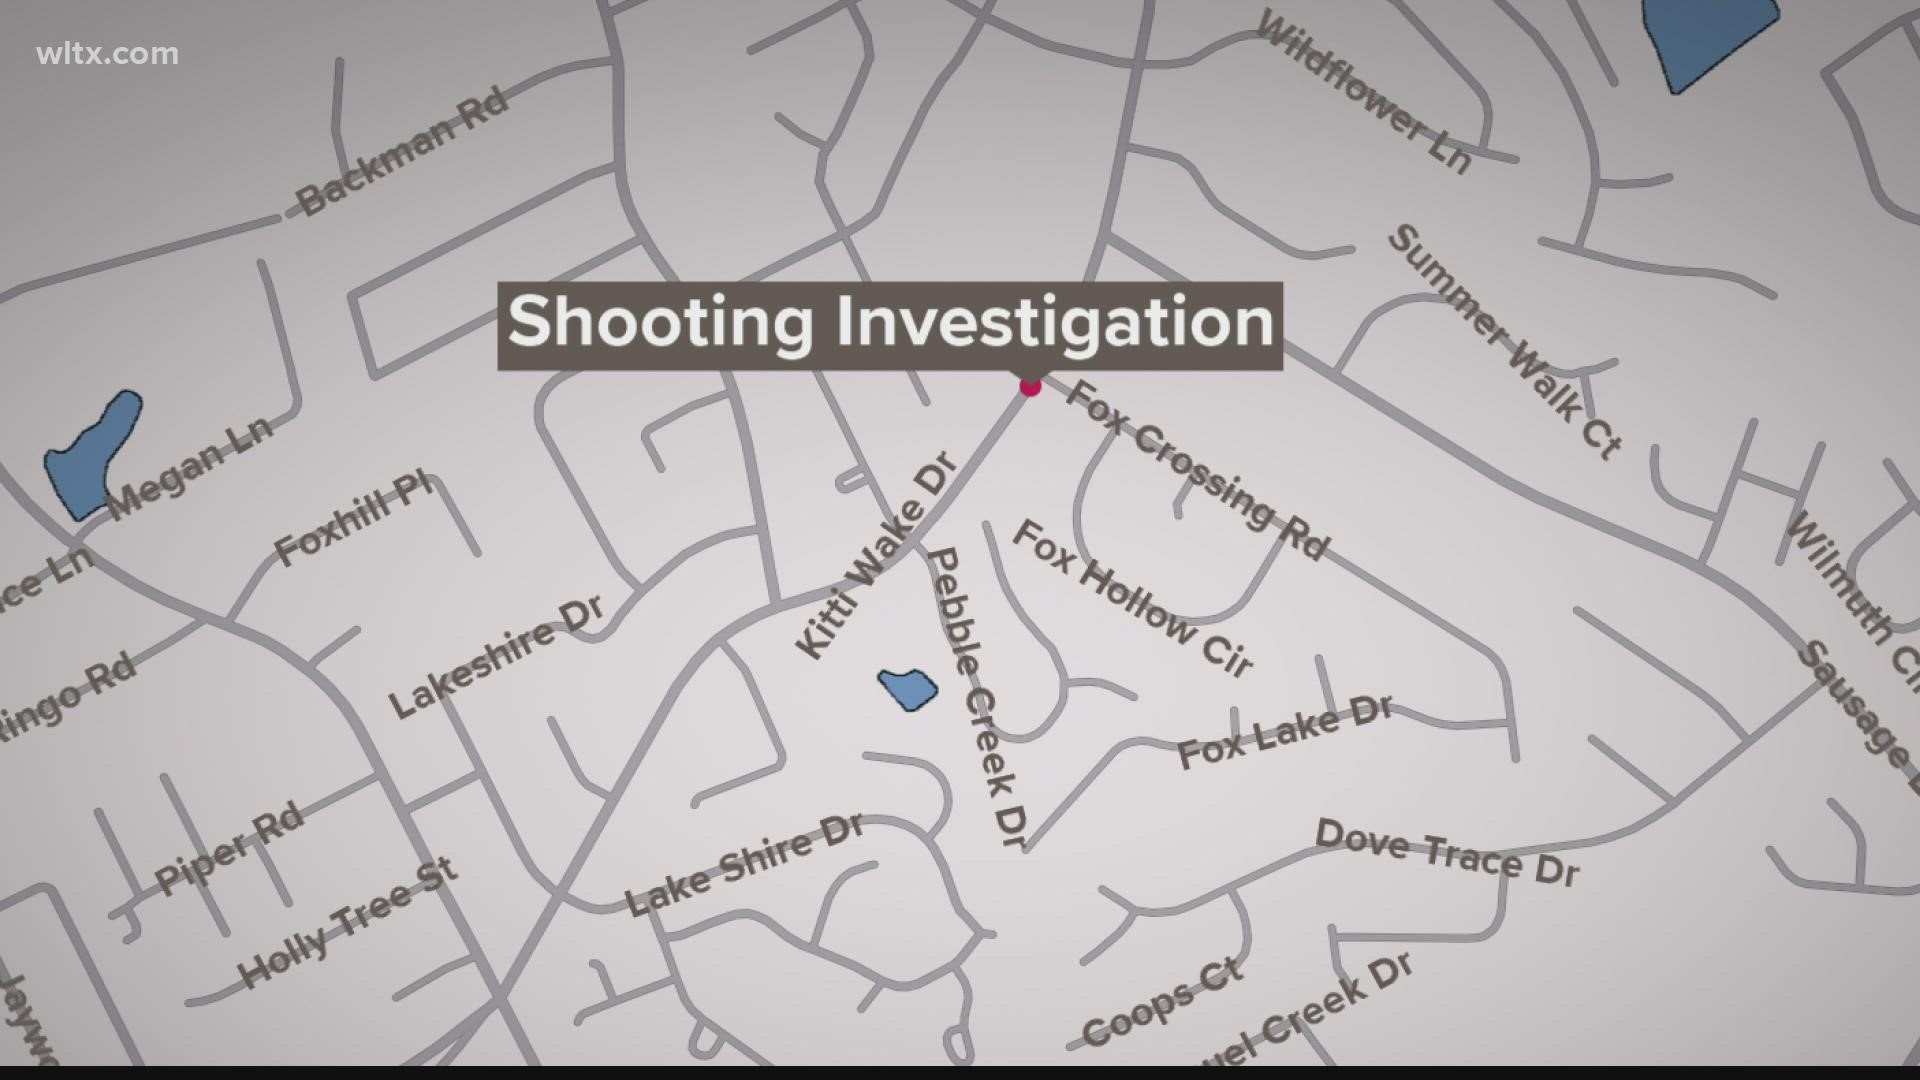 The Lexington County Sheriff's Department is investigating after a shooting around midday on Sunday that sent one person to the hospital.